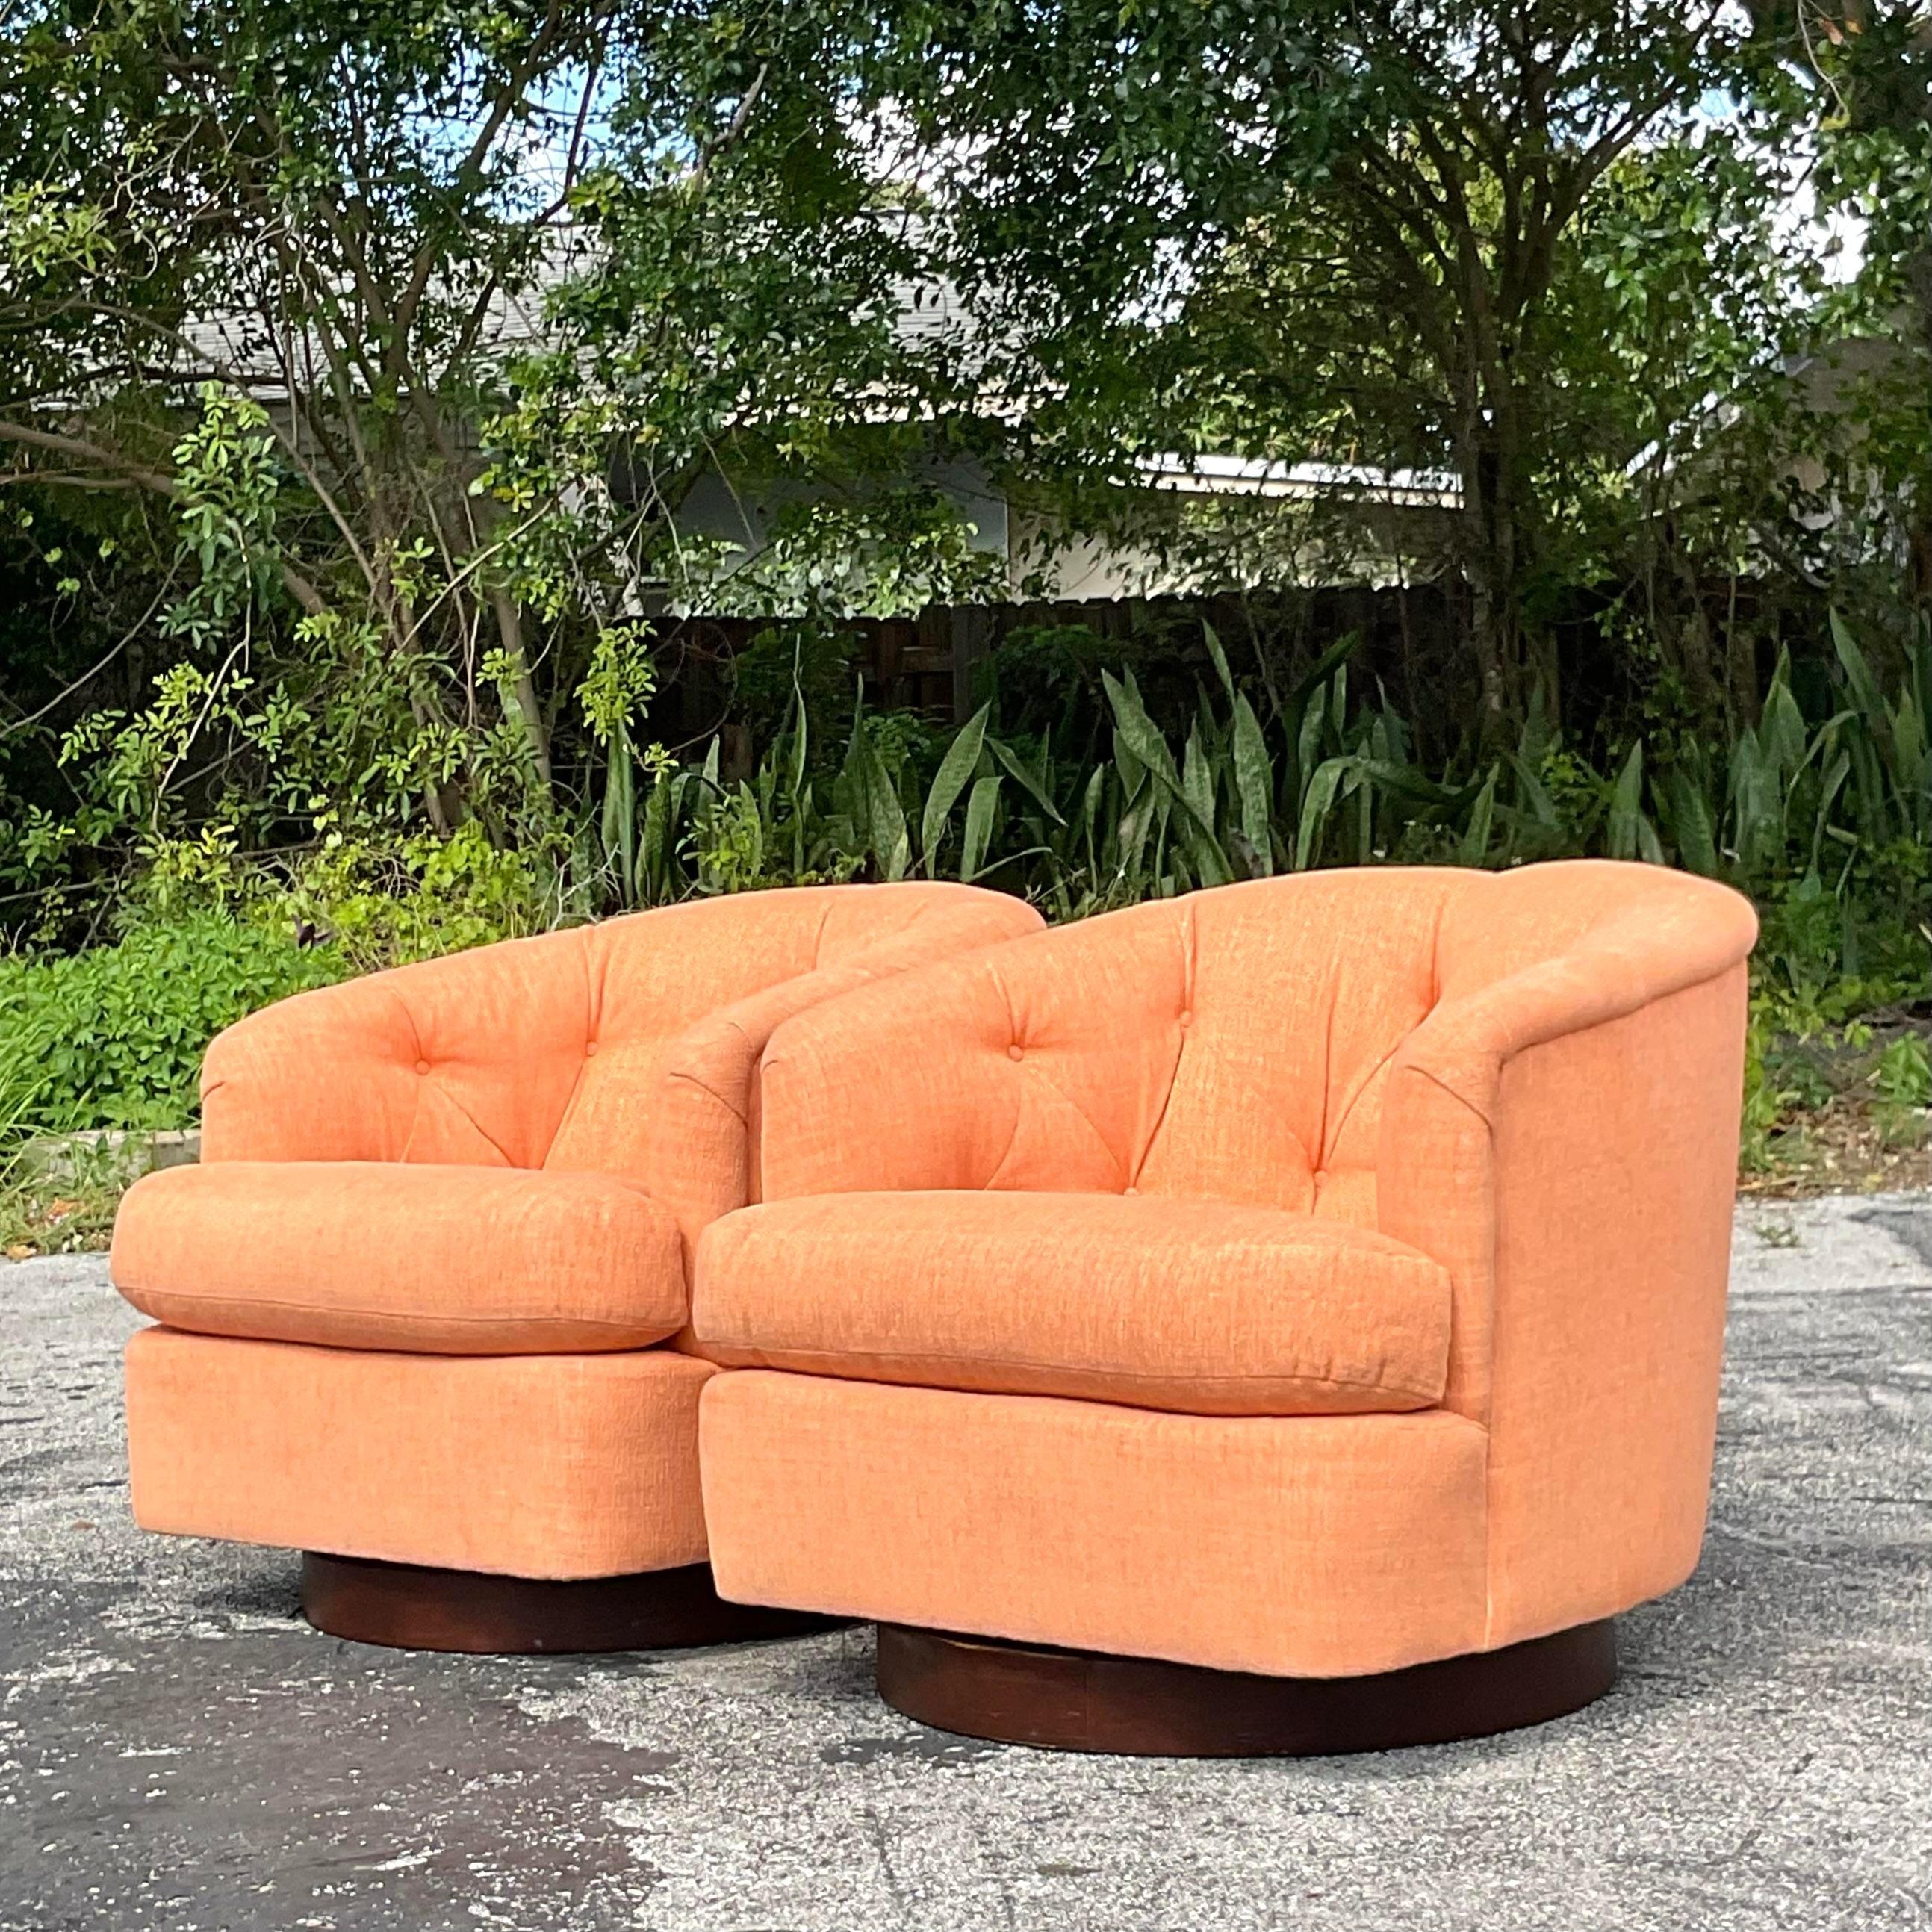 20th Century Vintage Boho Tufted Swivel Chairs After Milo Baughman - a Pair For Sale